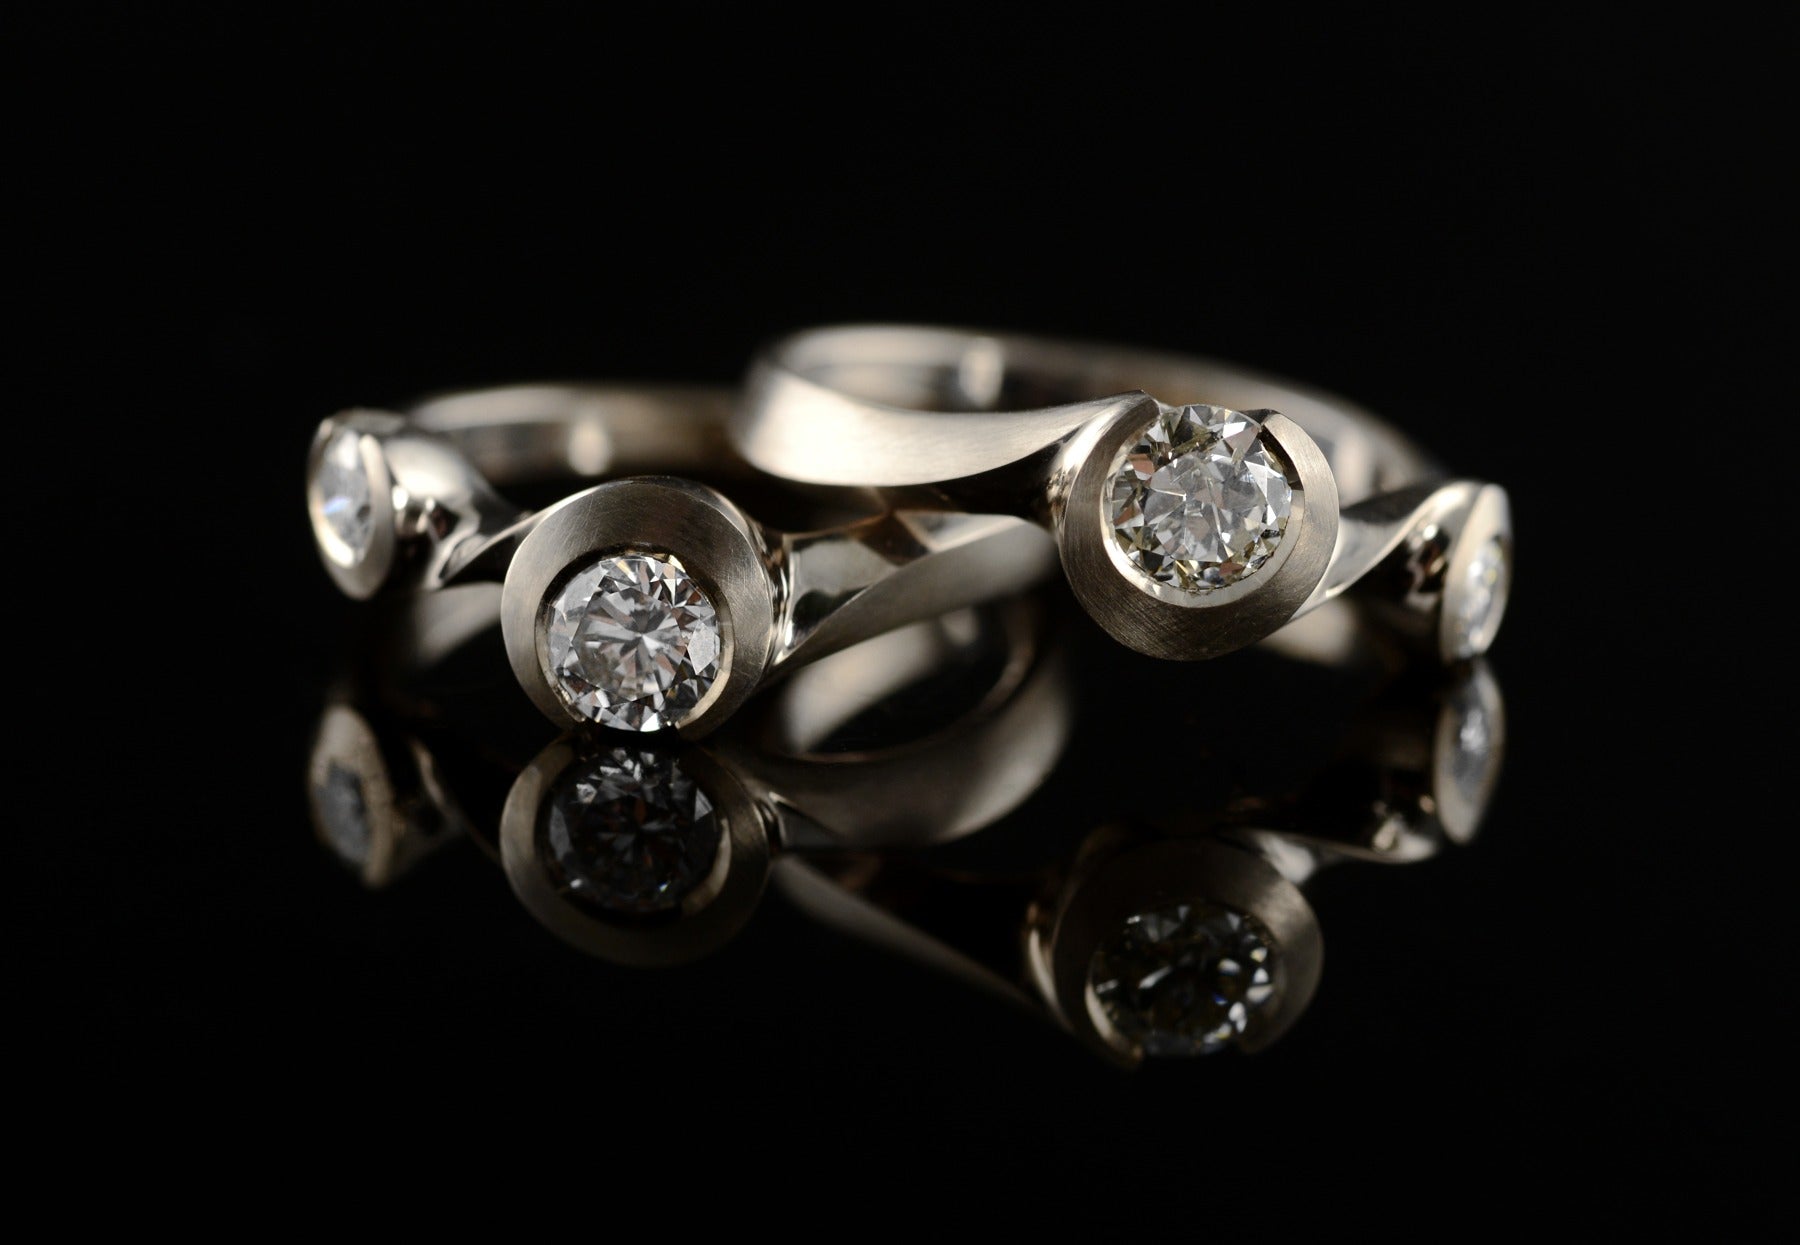 Arris carved white gold and diamond interlocking rings